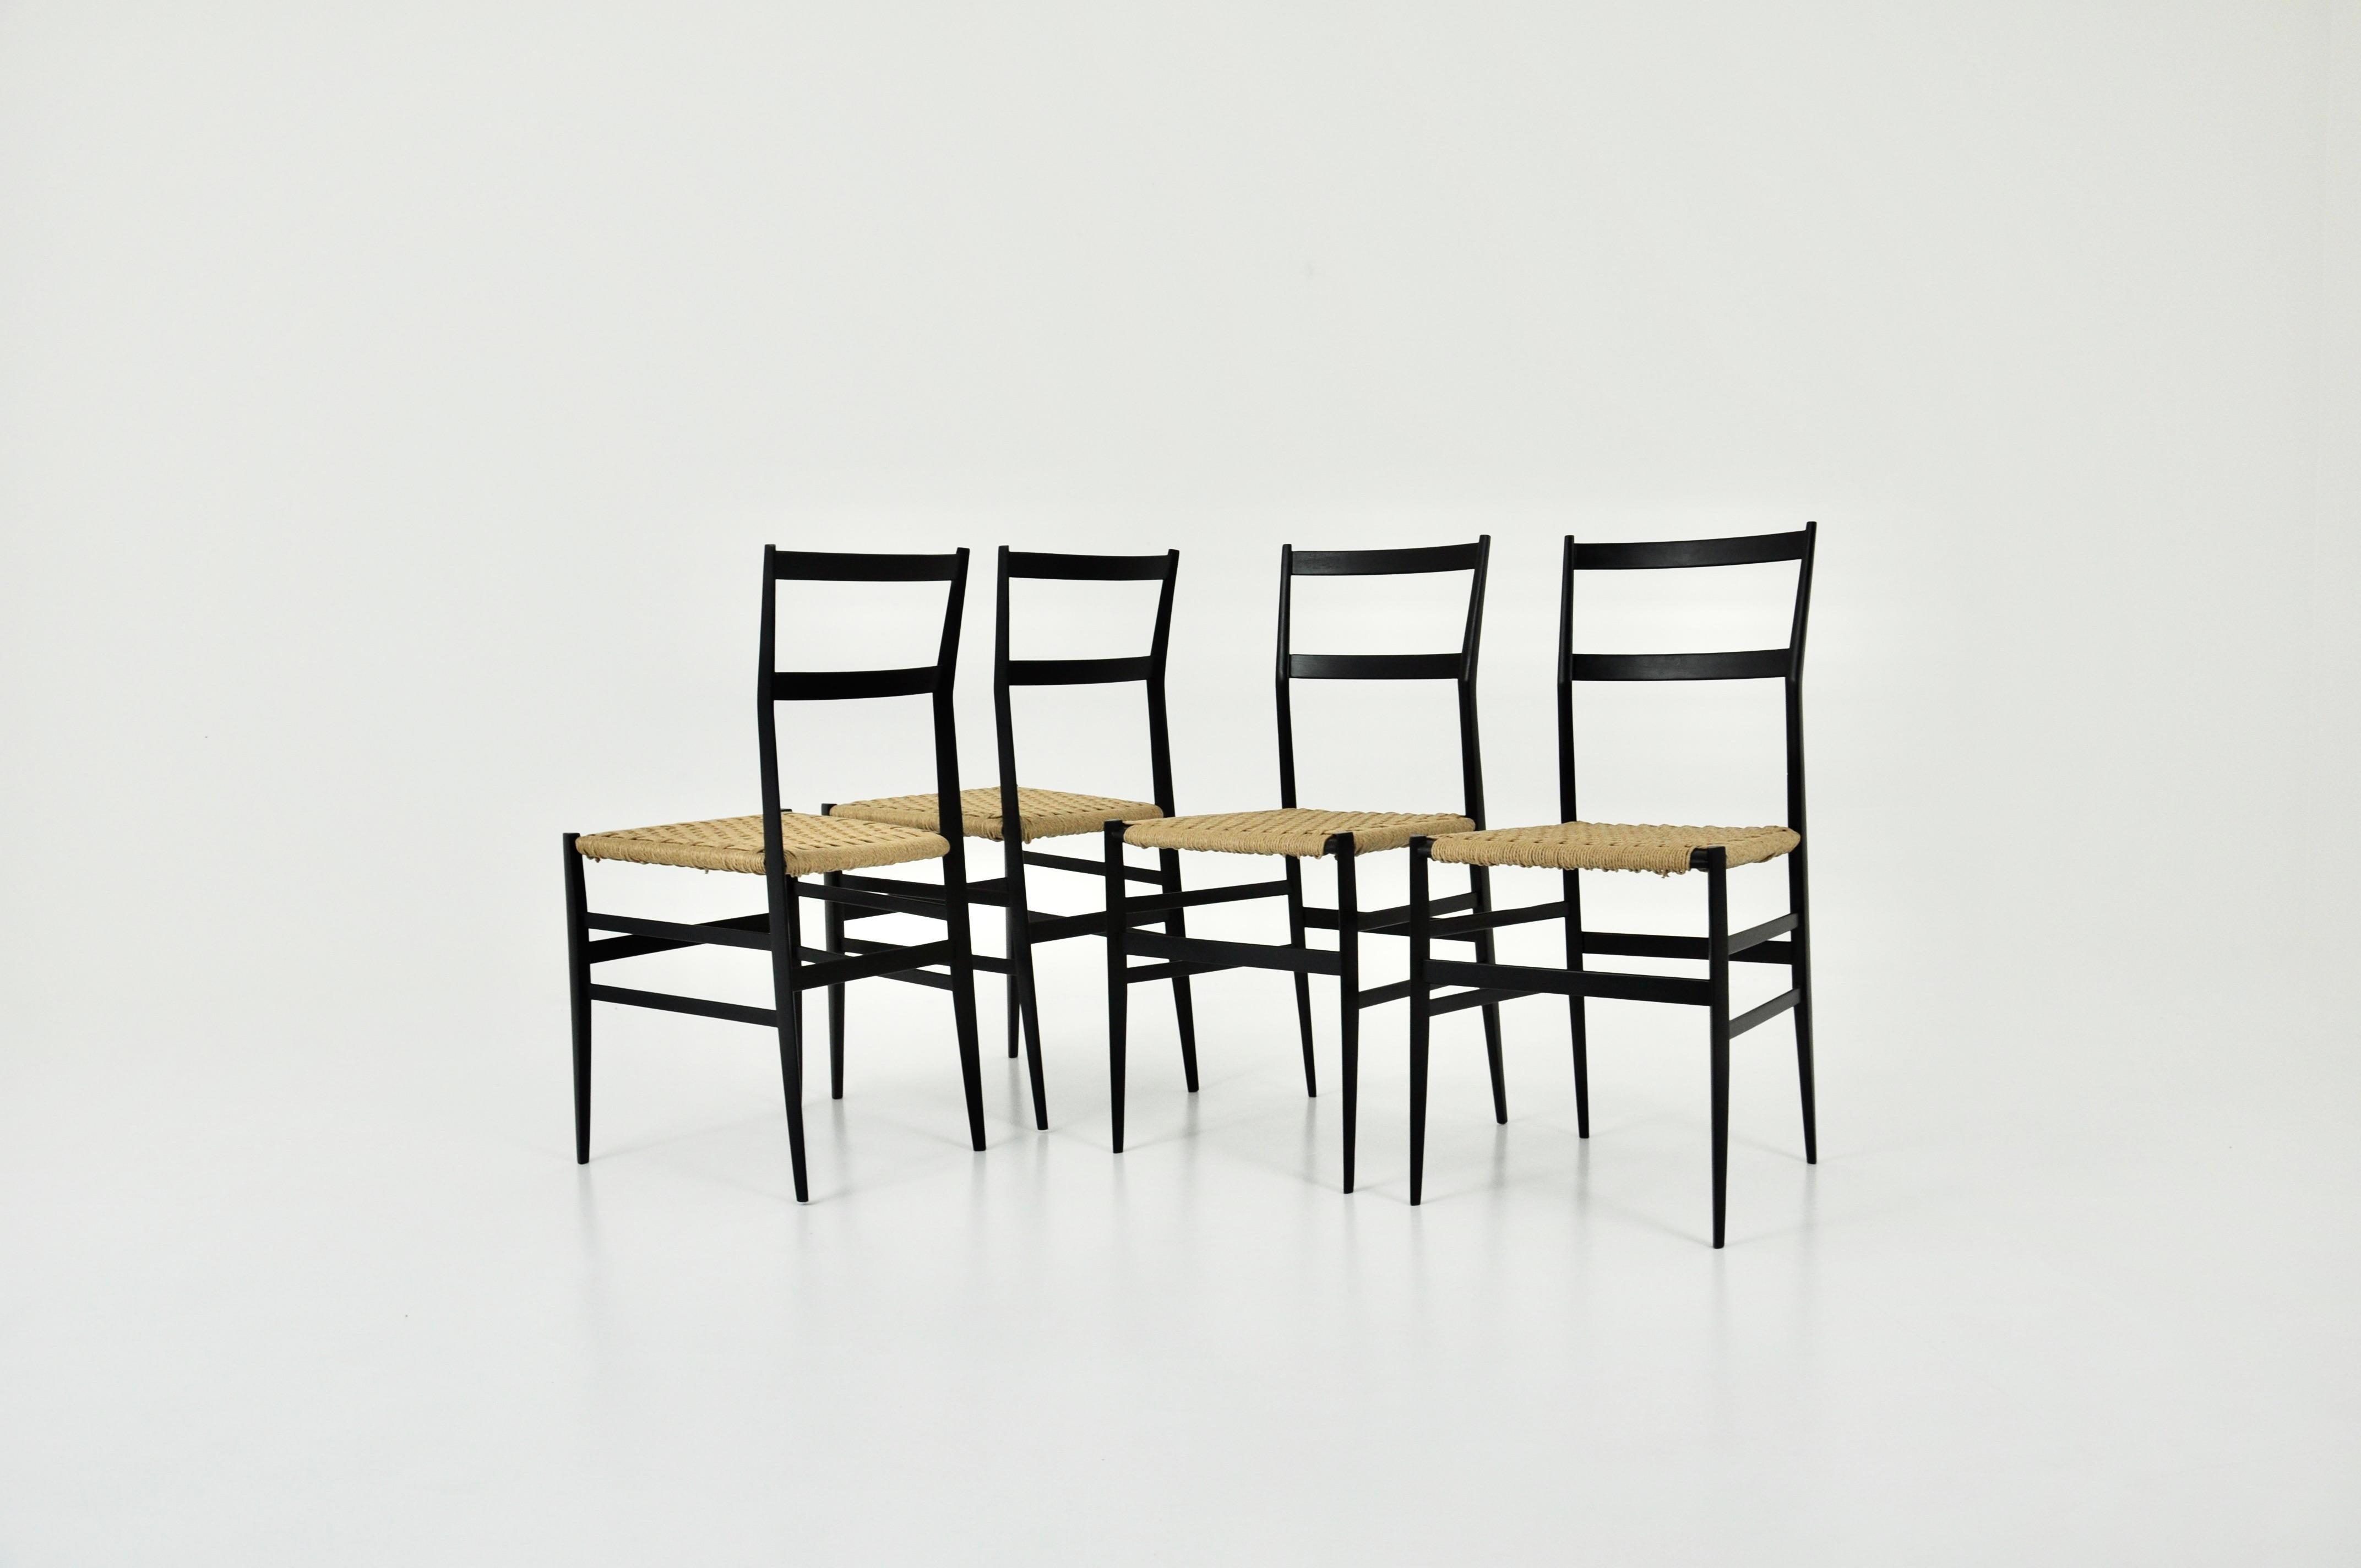 Set of 4 black wooden chairs, rope seat by Gio Ponti. Measures: Seat height 47cm. Wear due to time and age of the chairs.